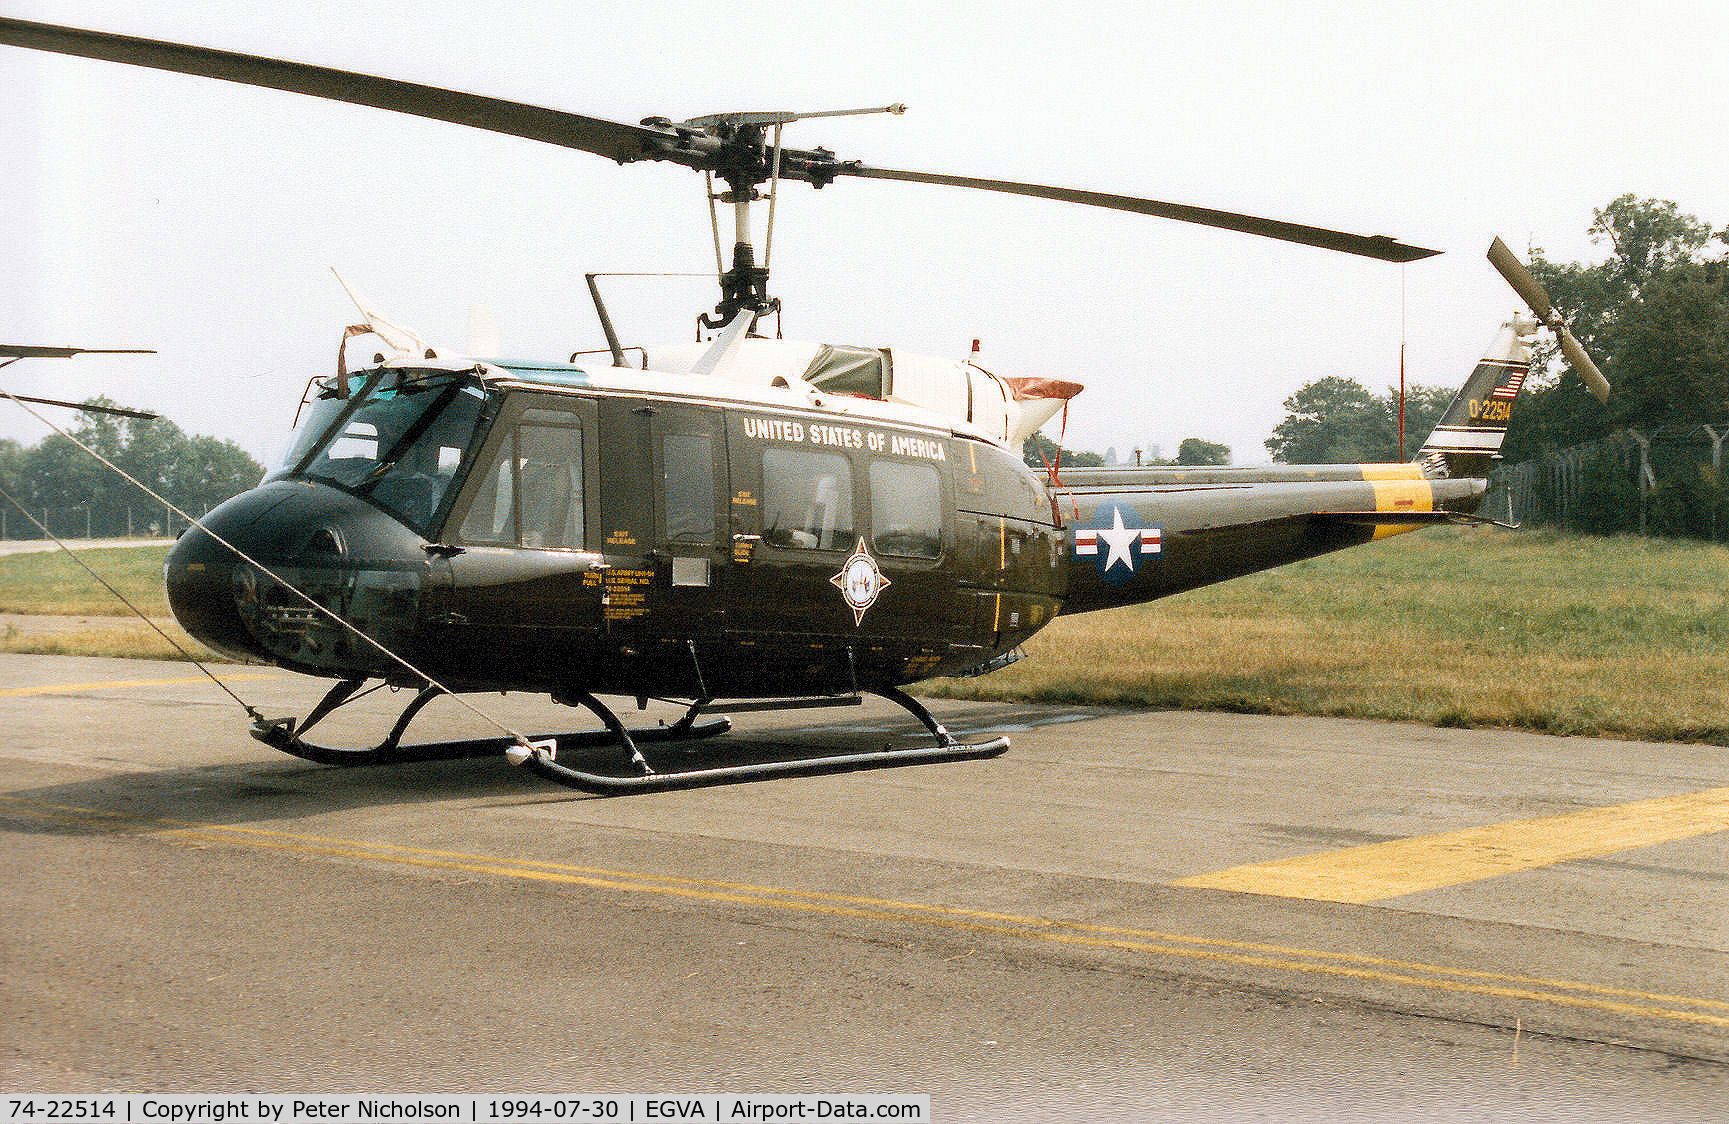 74-22514, 1974 Bell UH-1H Iroquois C/N 13838, UH-1H Iroquois, callsign Clue 39, of the United States European Command on display at the 1994 Intnl Air Tattoo at RAF Fairford.